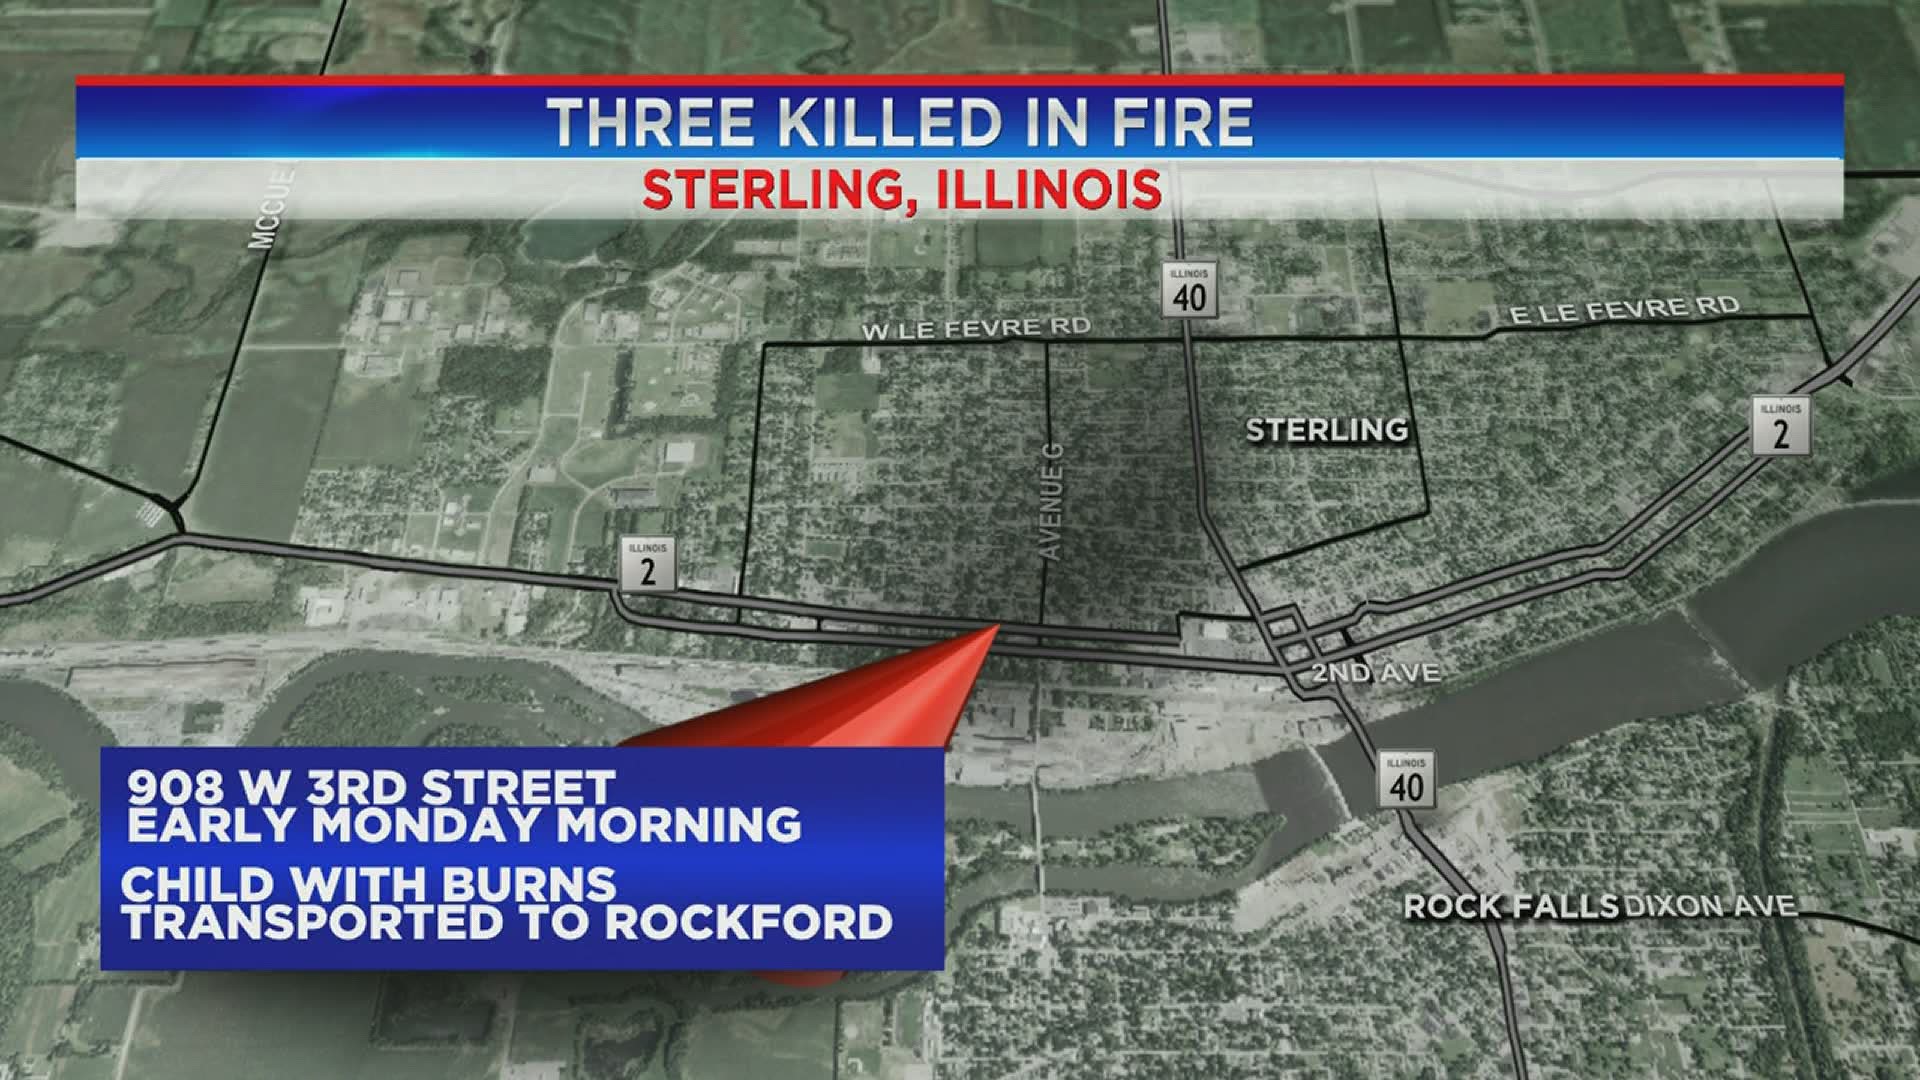 One of the victims includes a child who was transported to Rockford for burn treatments.